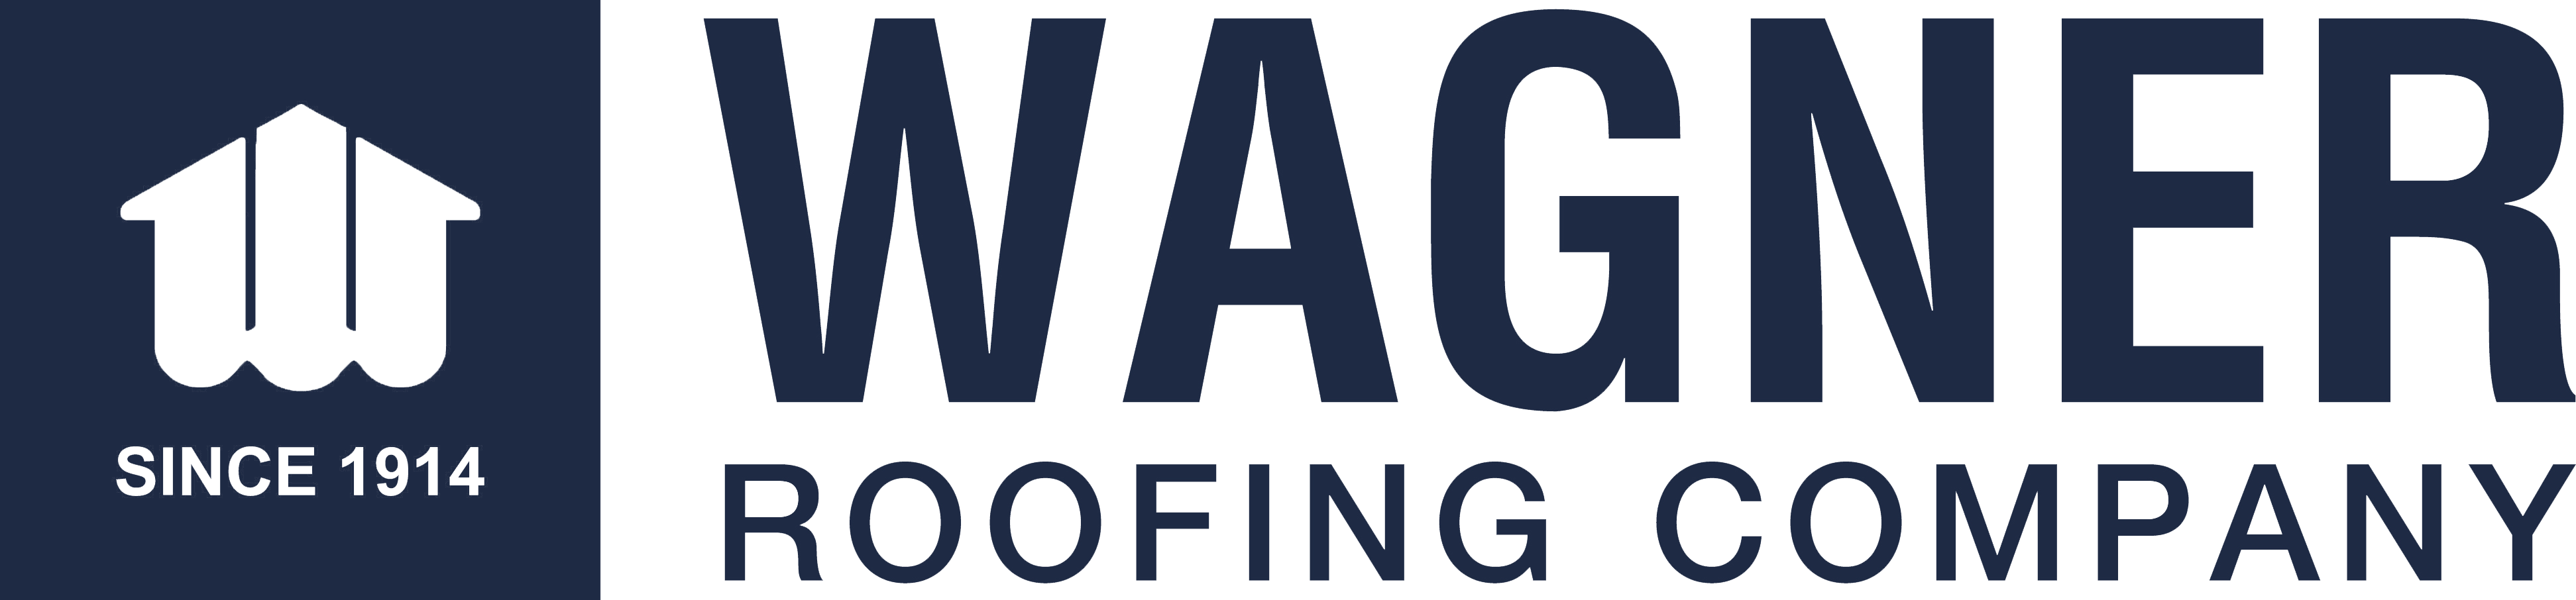 Wagner Roofing Company logo